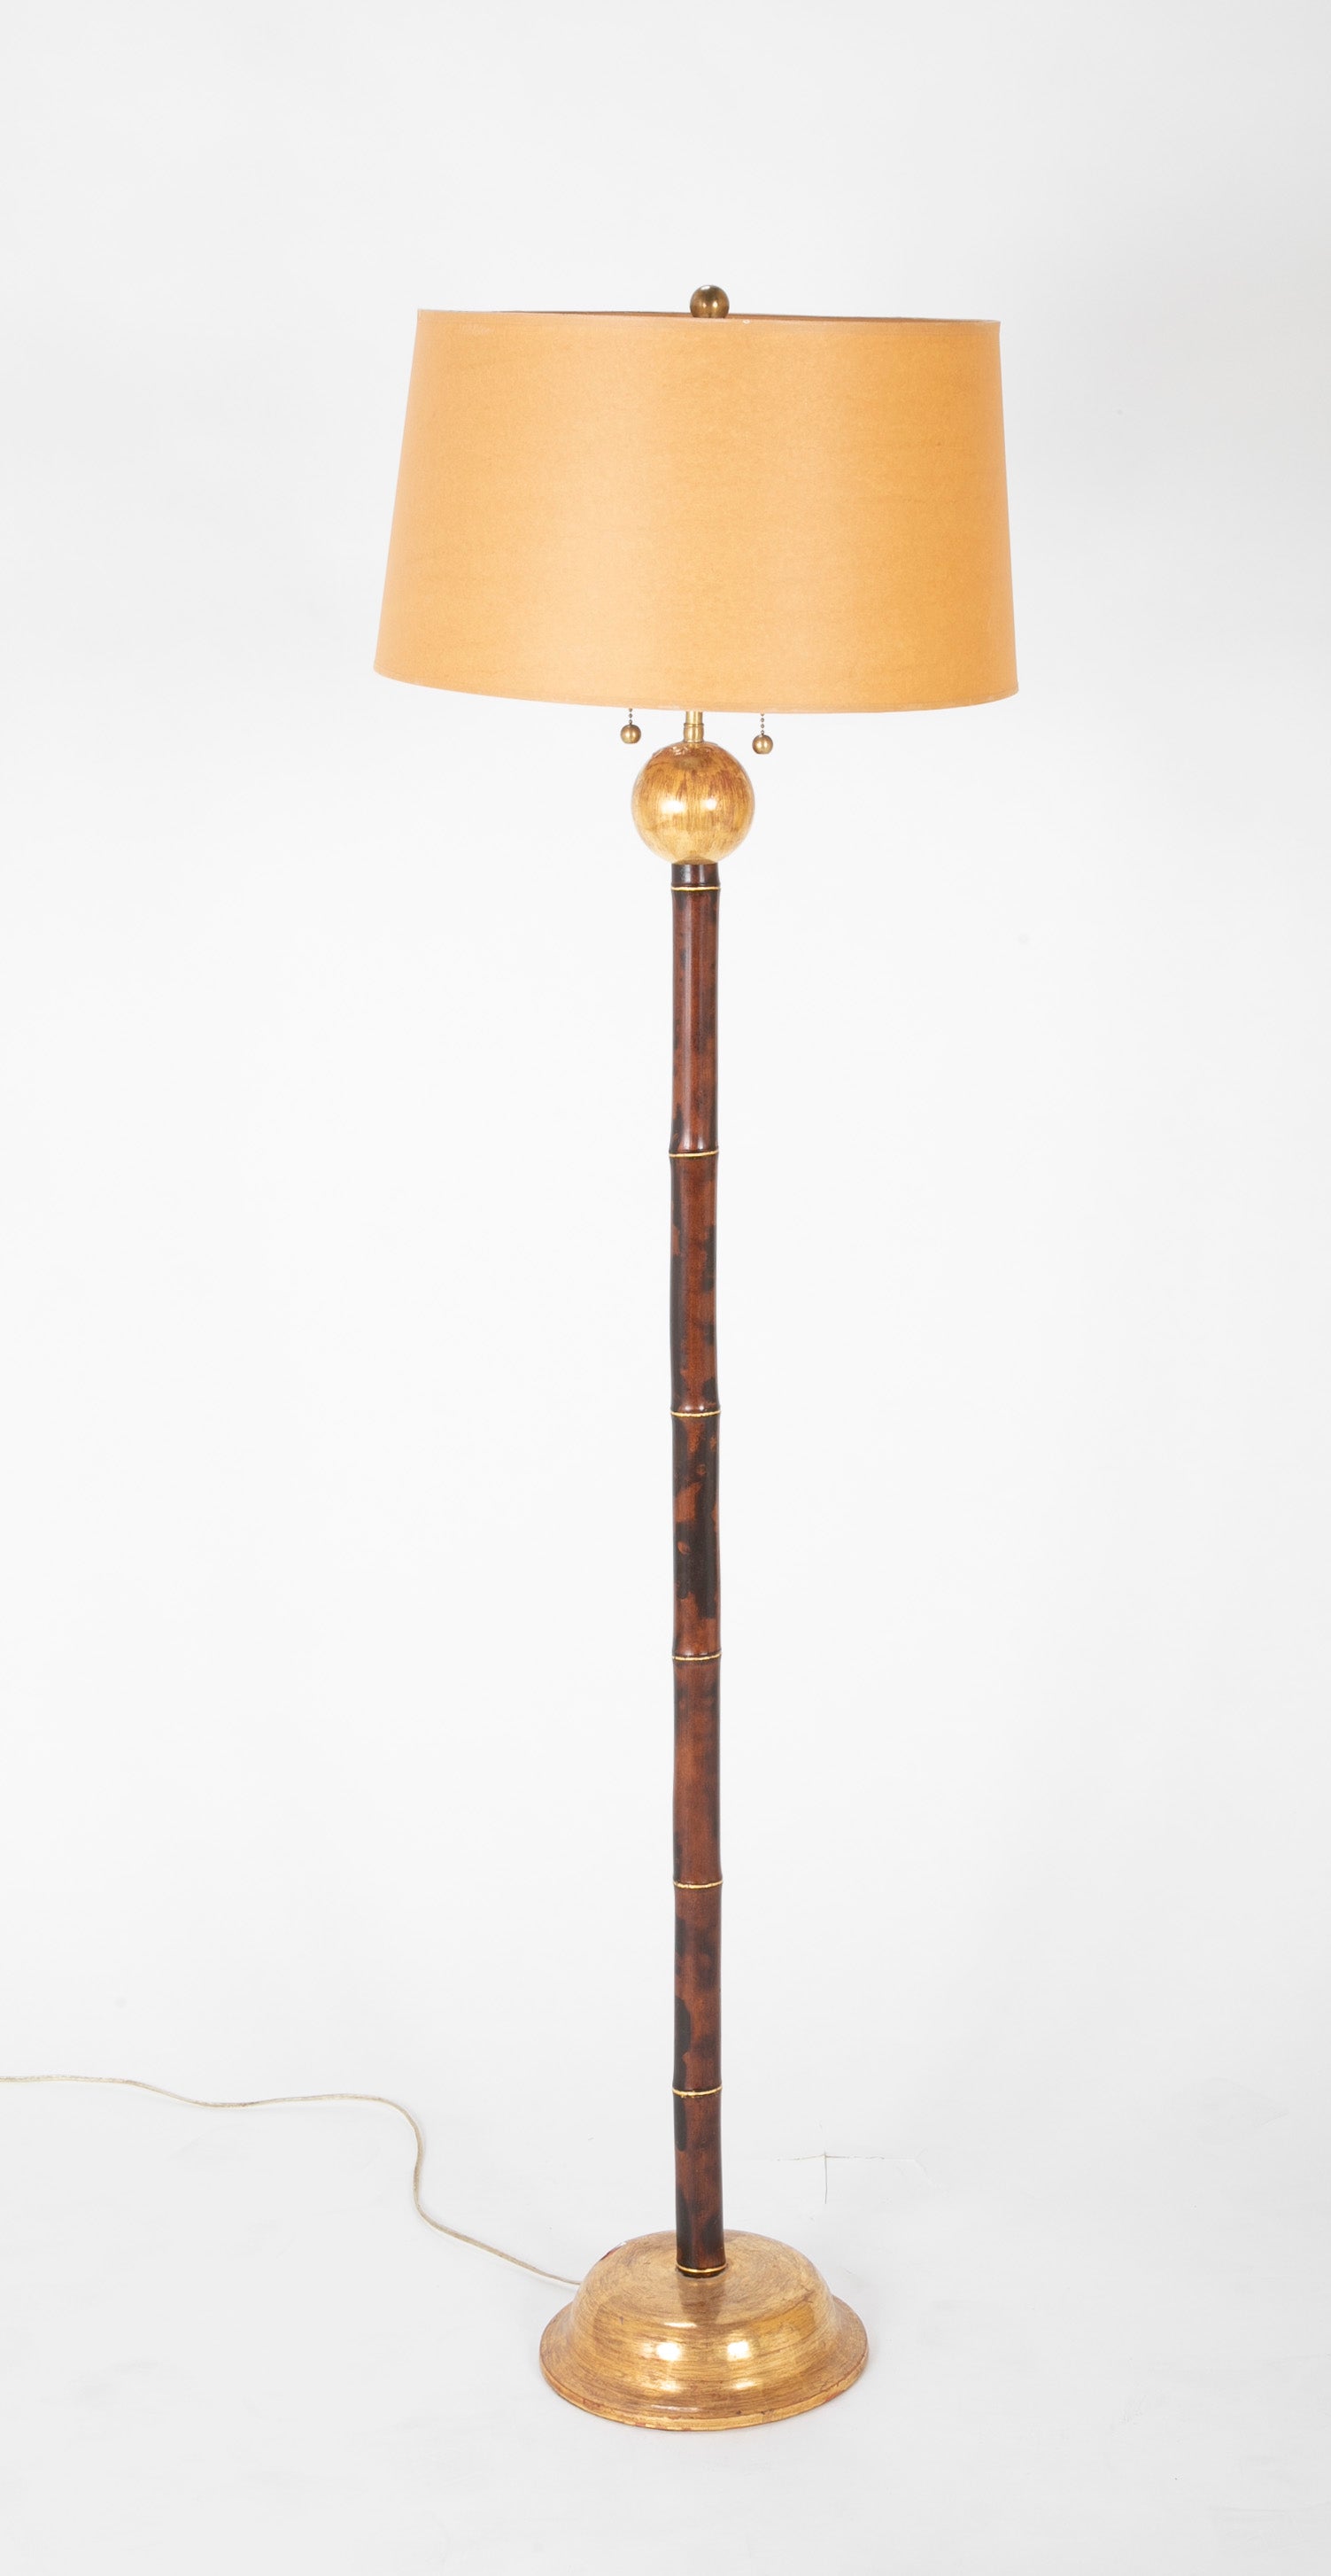 20th Century Gilt Faux Bamboo Floor Lamp Avery Dash Collections